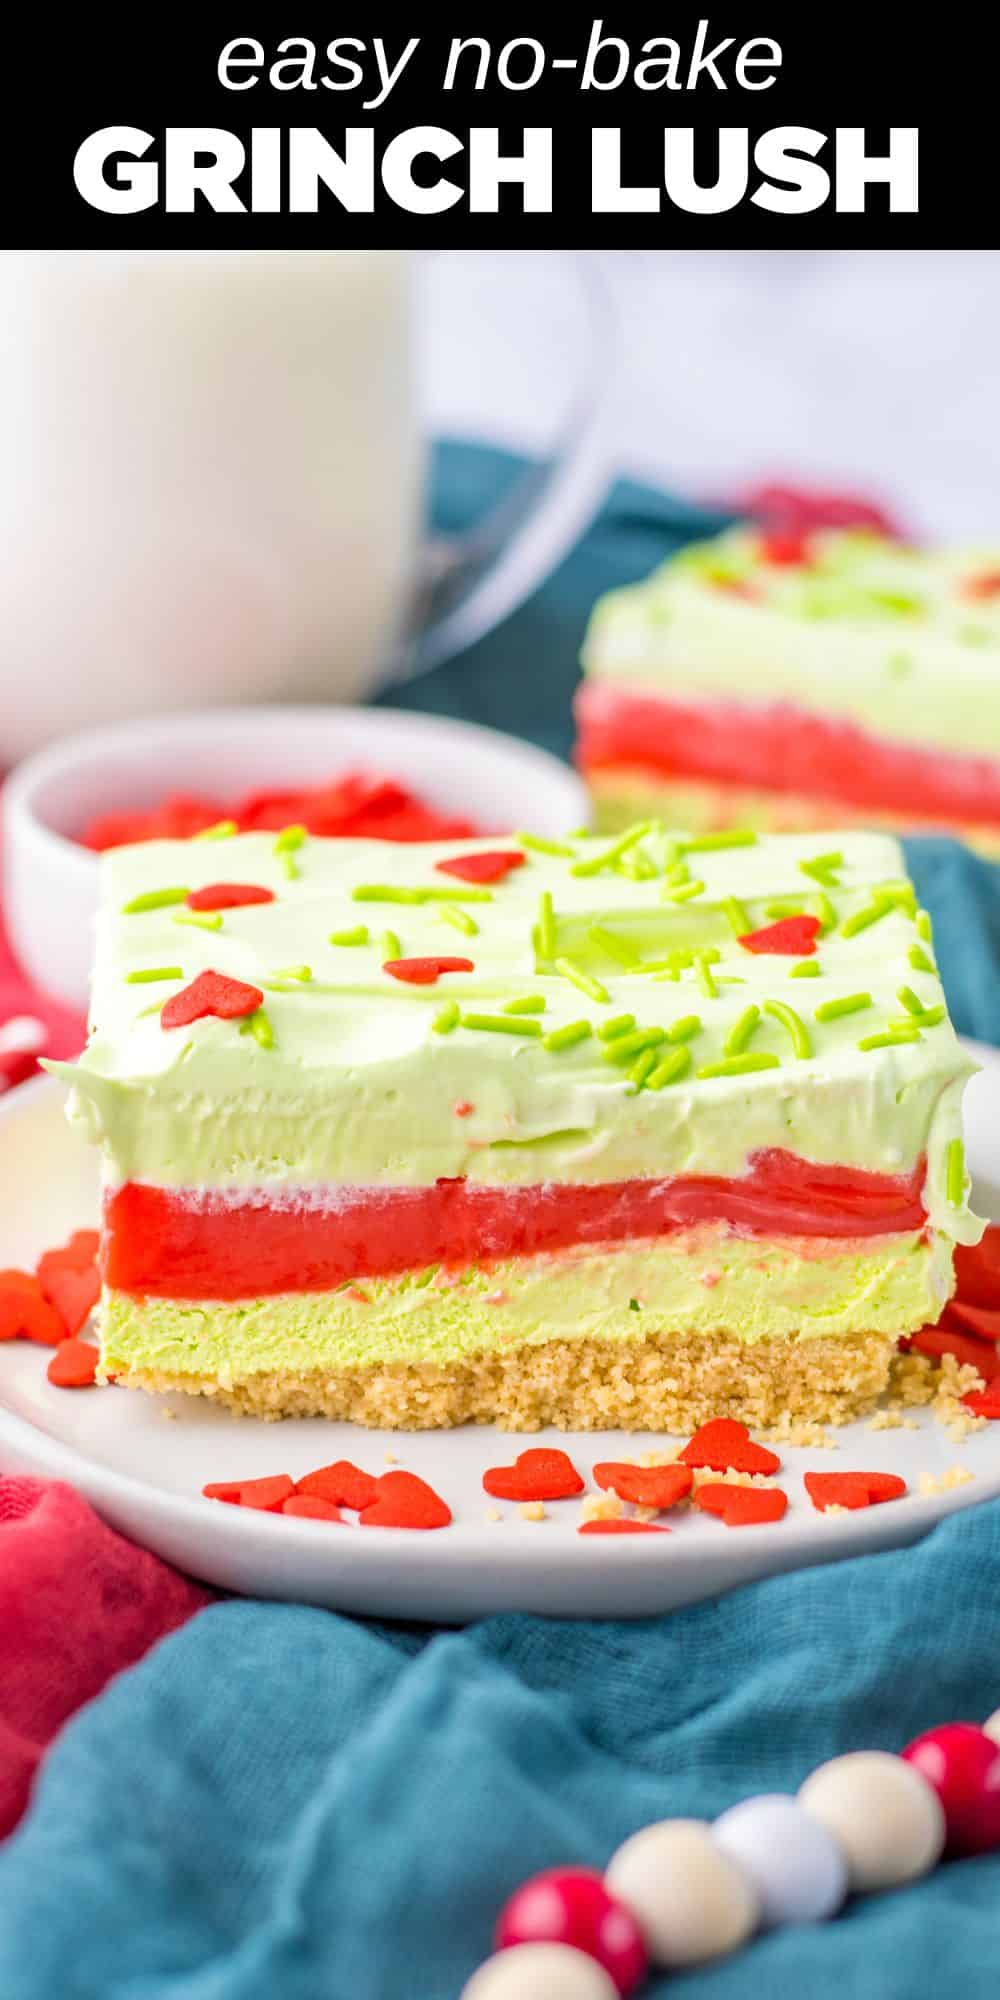 This sweet and creamy Grinch Layered Dessert is the perfect treat for the holiday season. Layers of vanilla cookies, fluffy cheesecake, and a creamy peppermint pudding layer get topped with whipped cream and sprinkles for a fun Grinch theme.